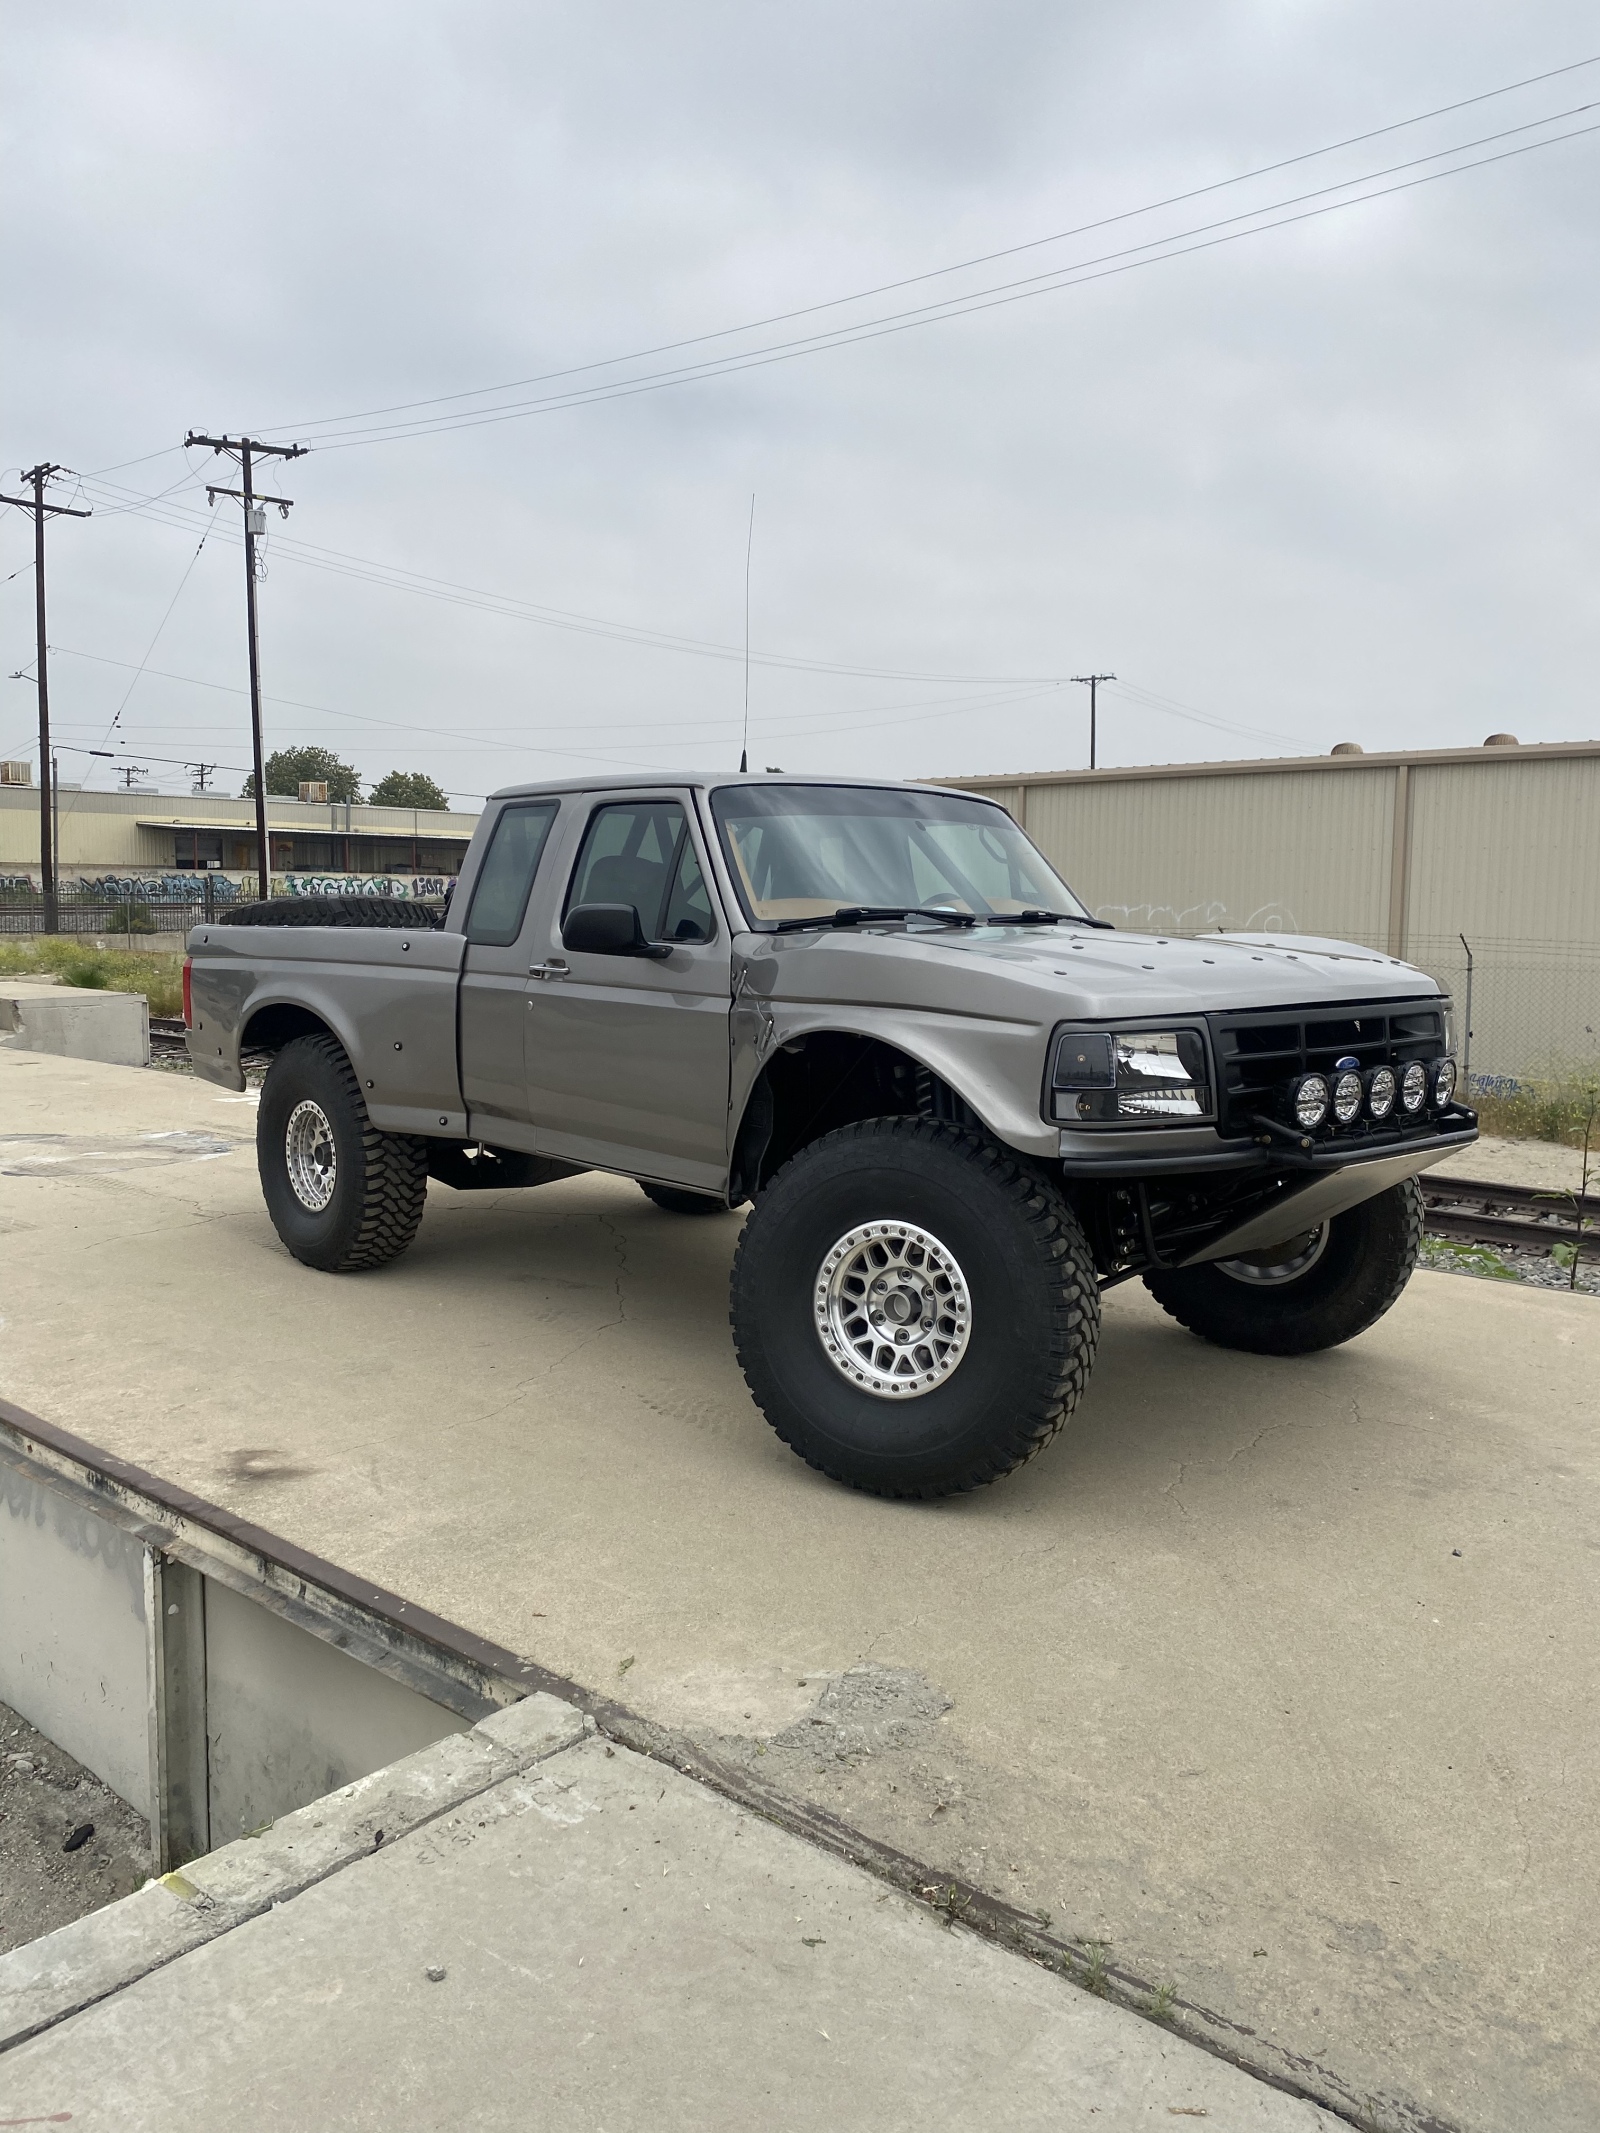 For Sale: OBS Ford F-150 Luxury Prerunner  - photo4